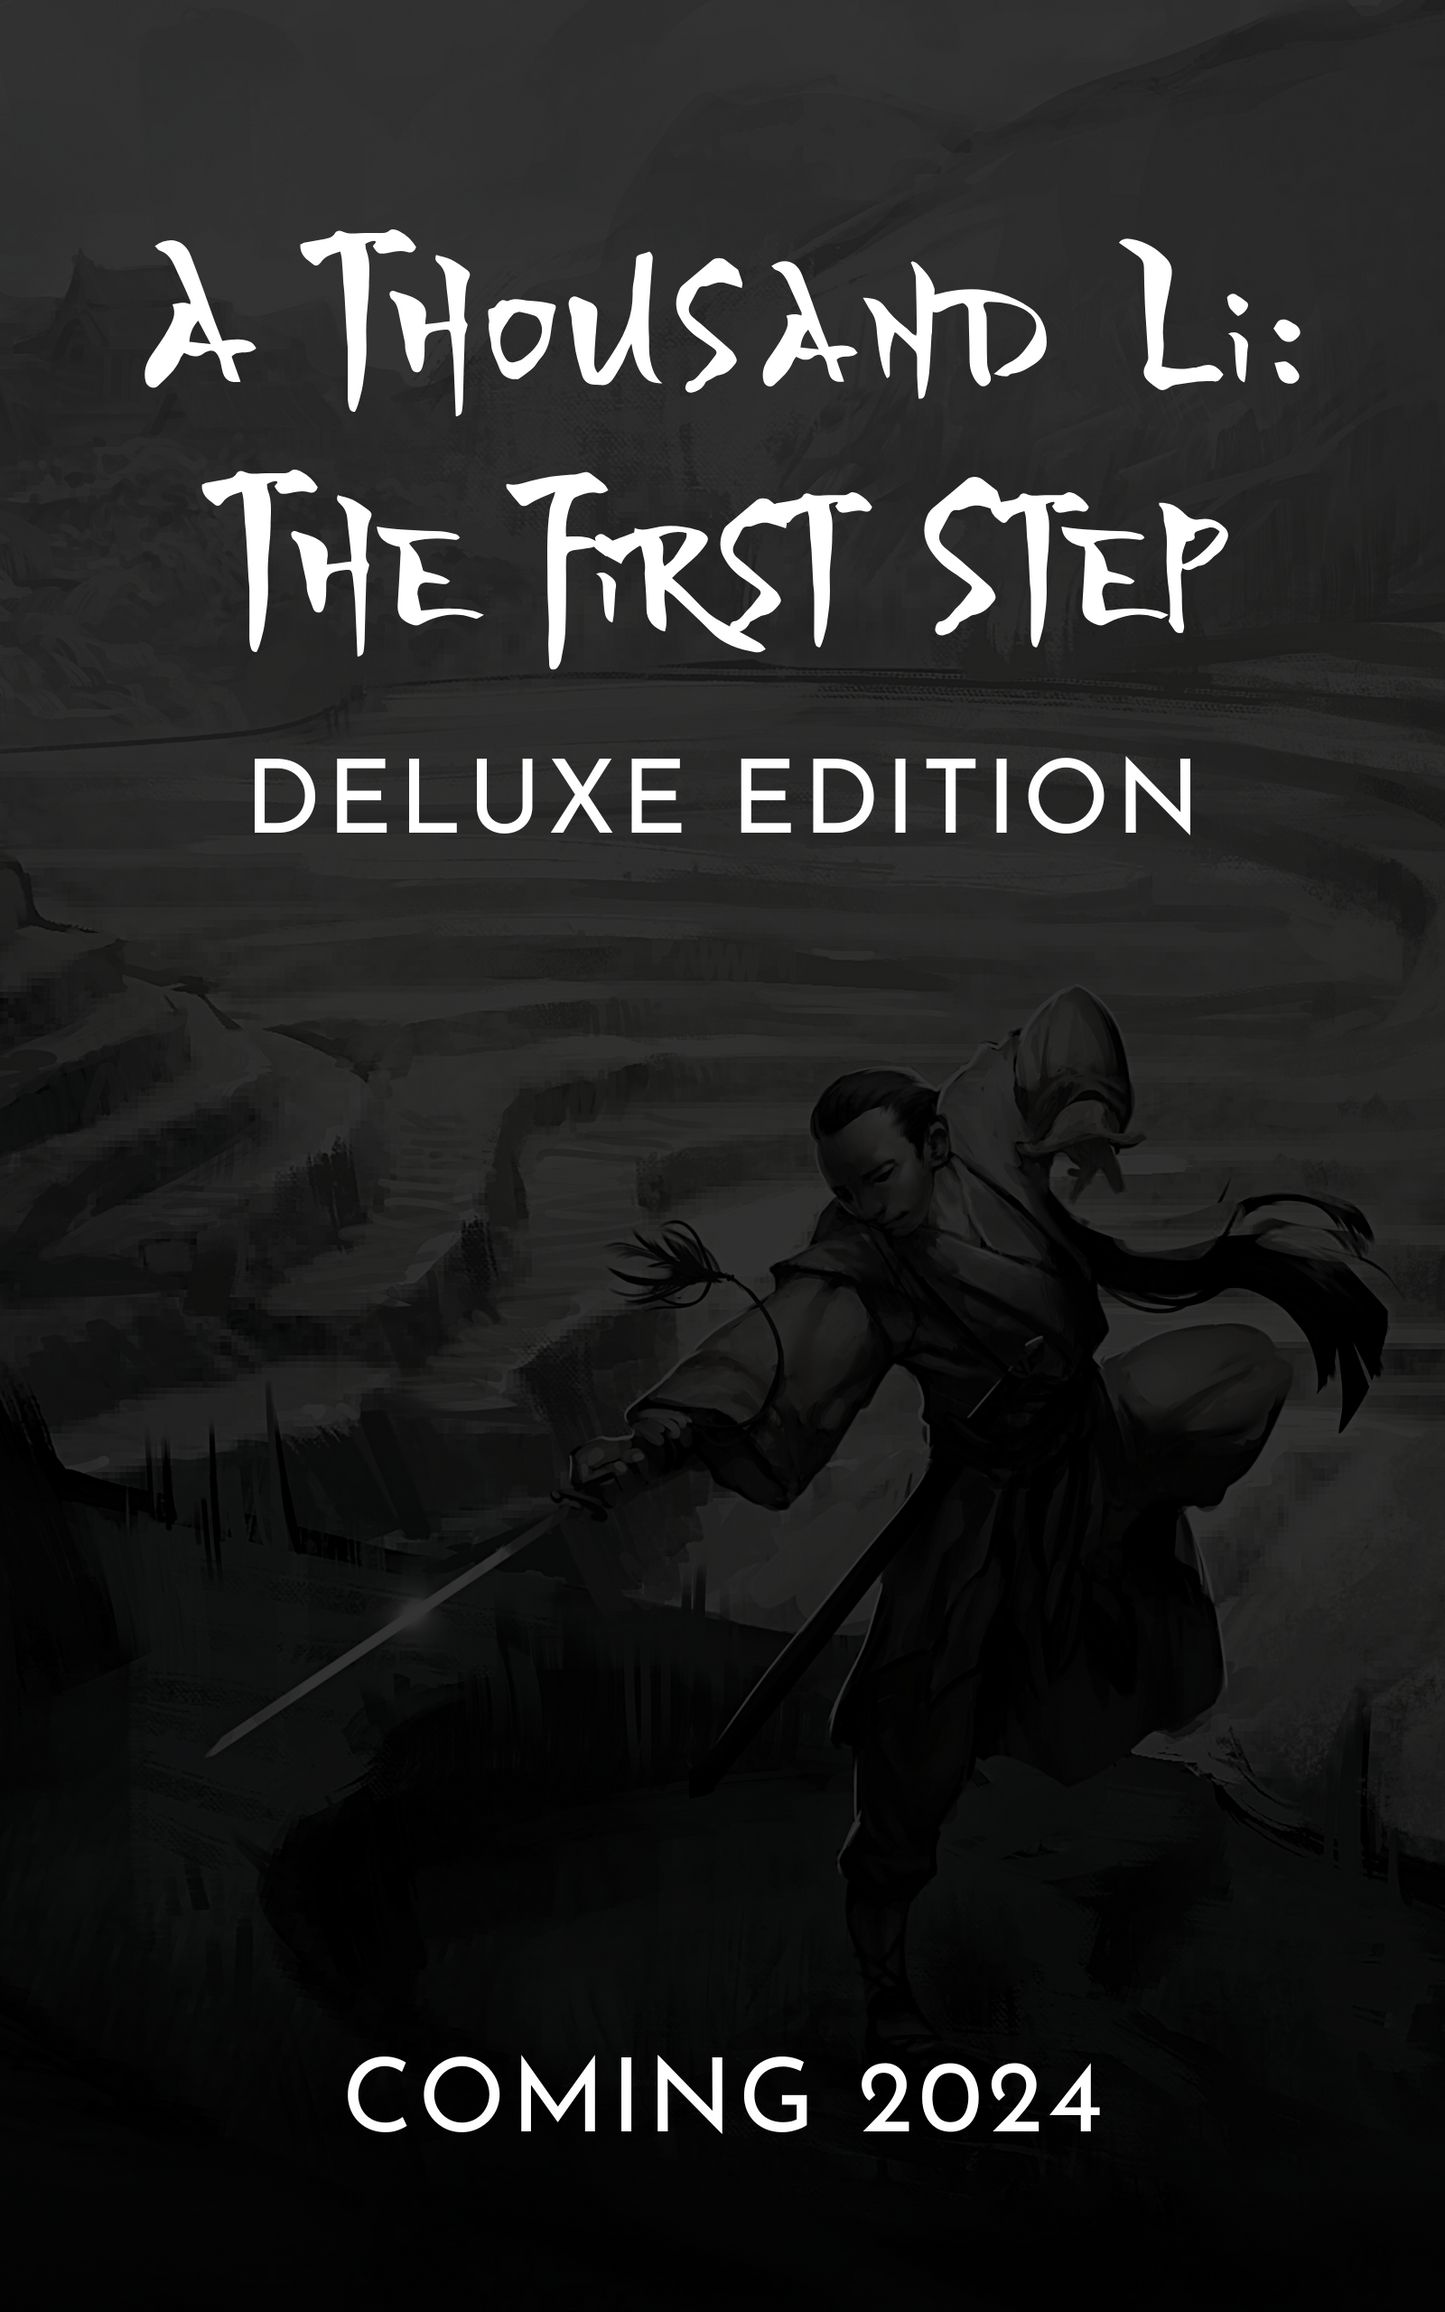 The First Step: Deluxe Edition (A Thousand Li #1)